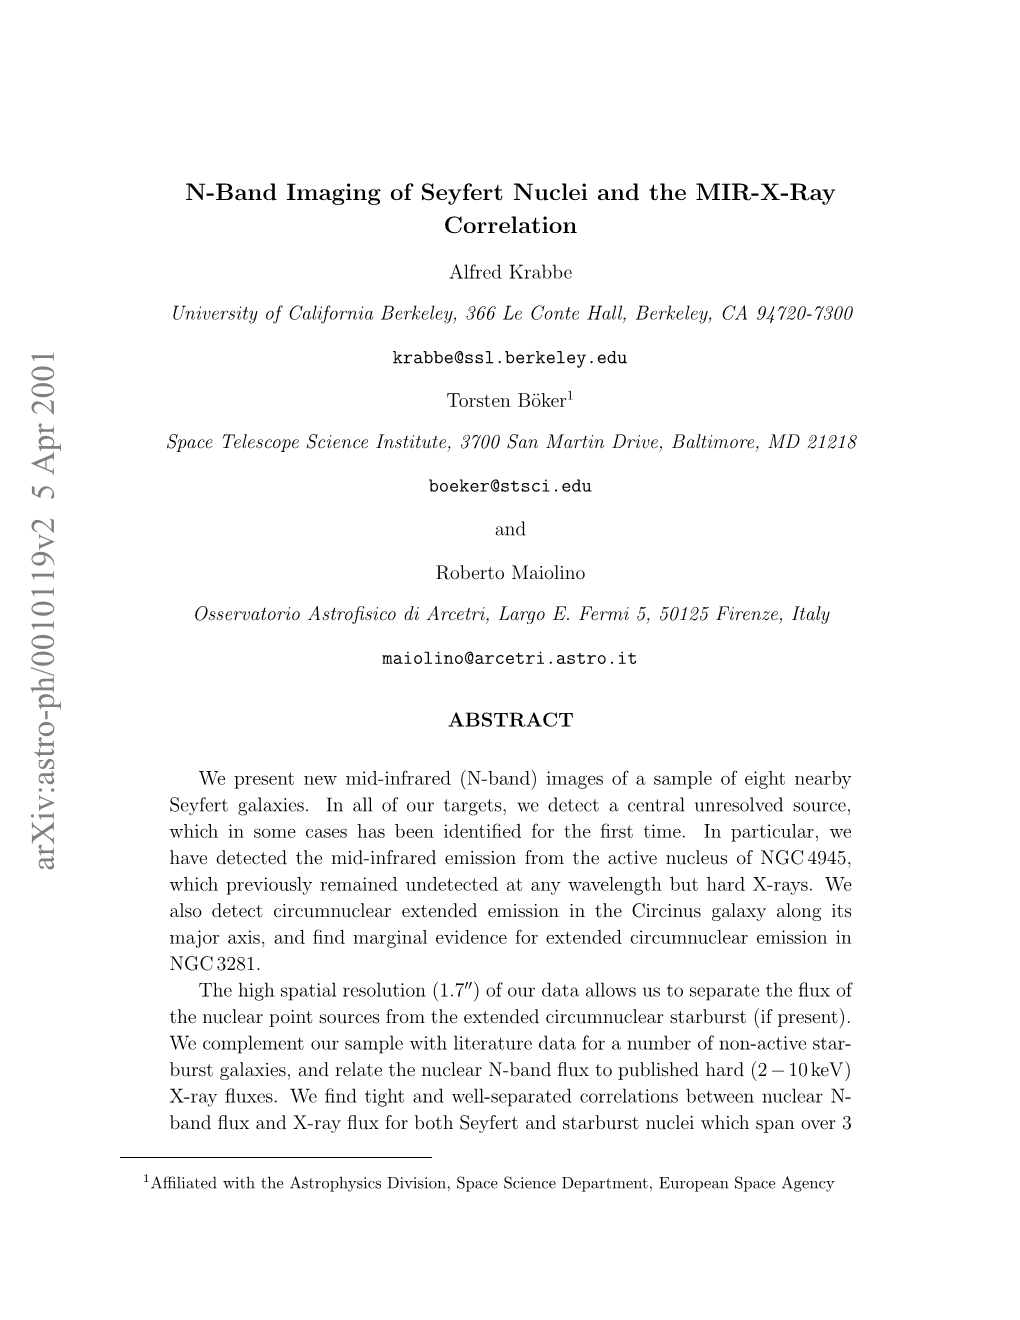 N-Band Imaging of Seyfert Nuclei and the MIR-X-Ray Correlation